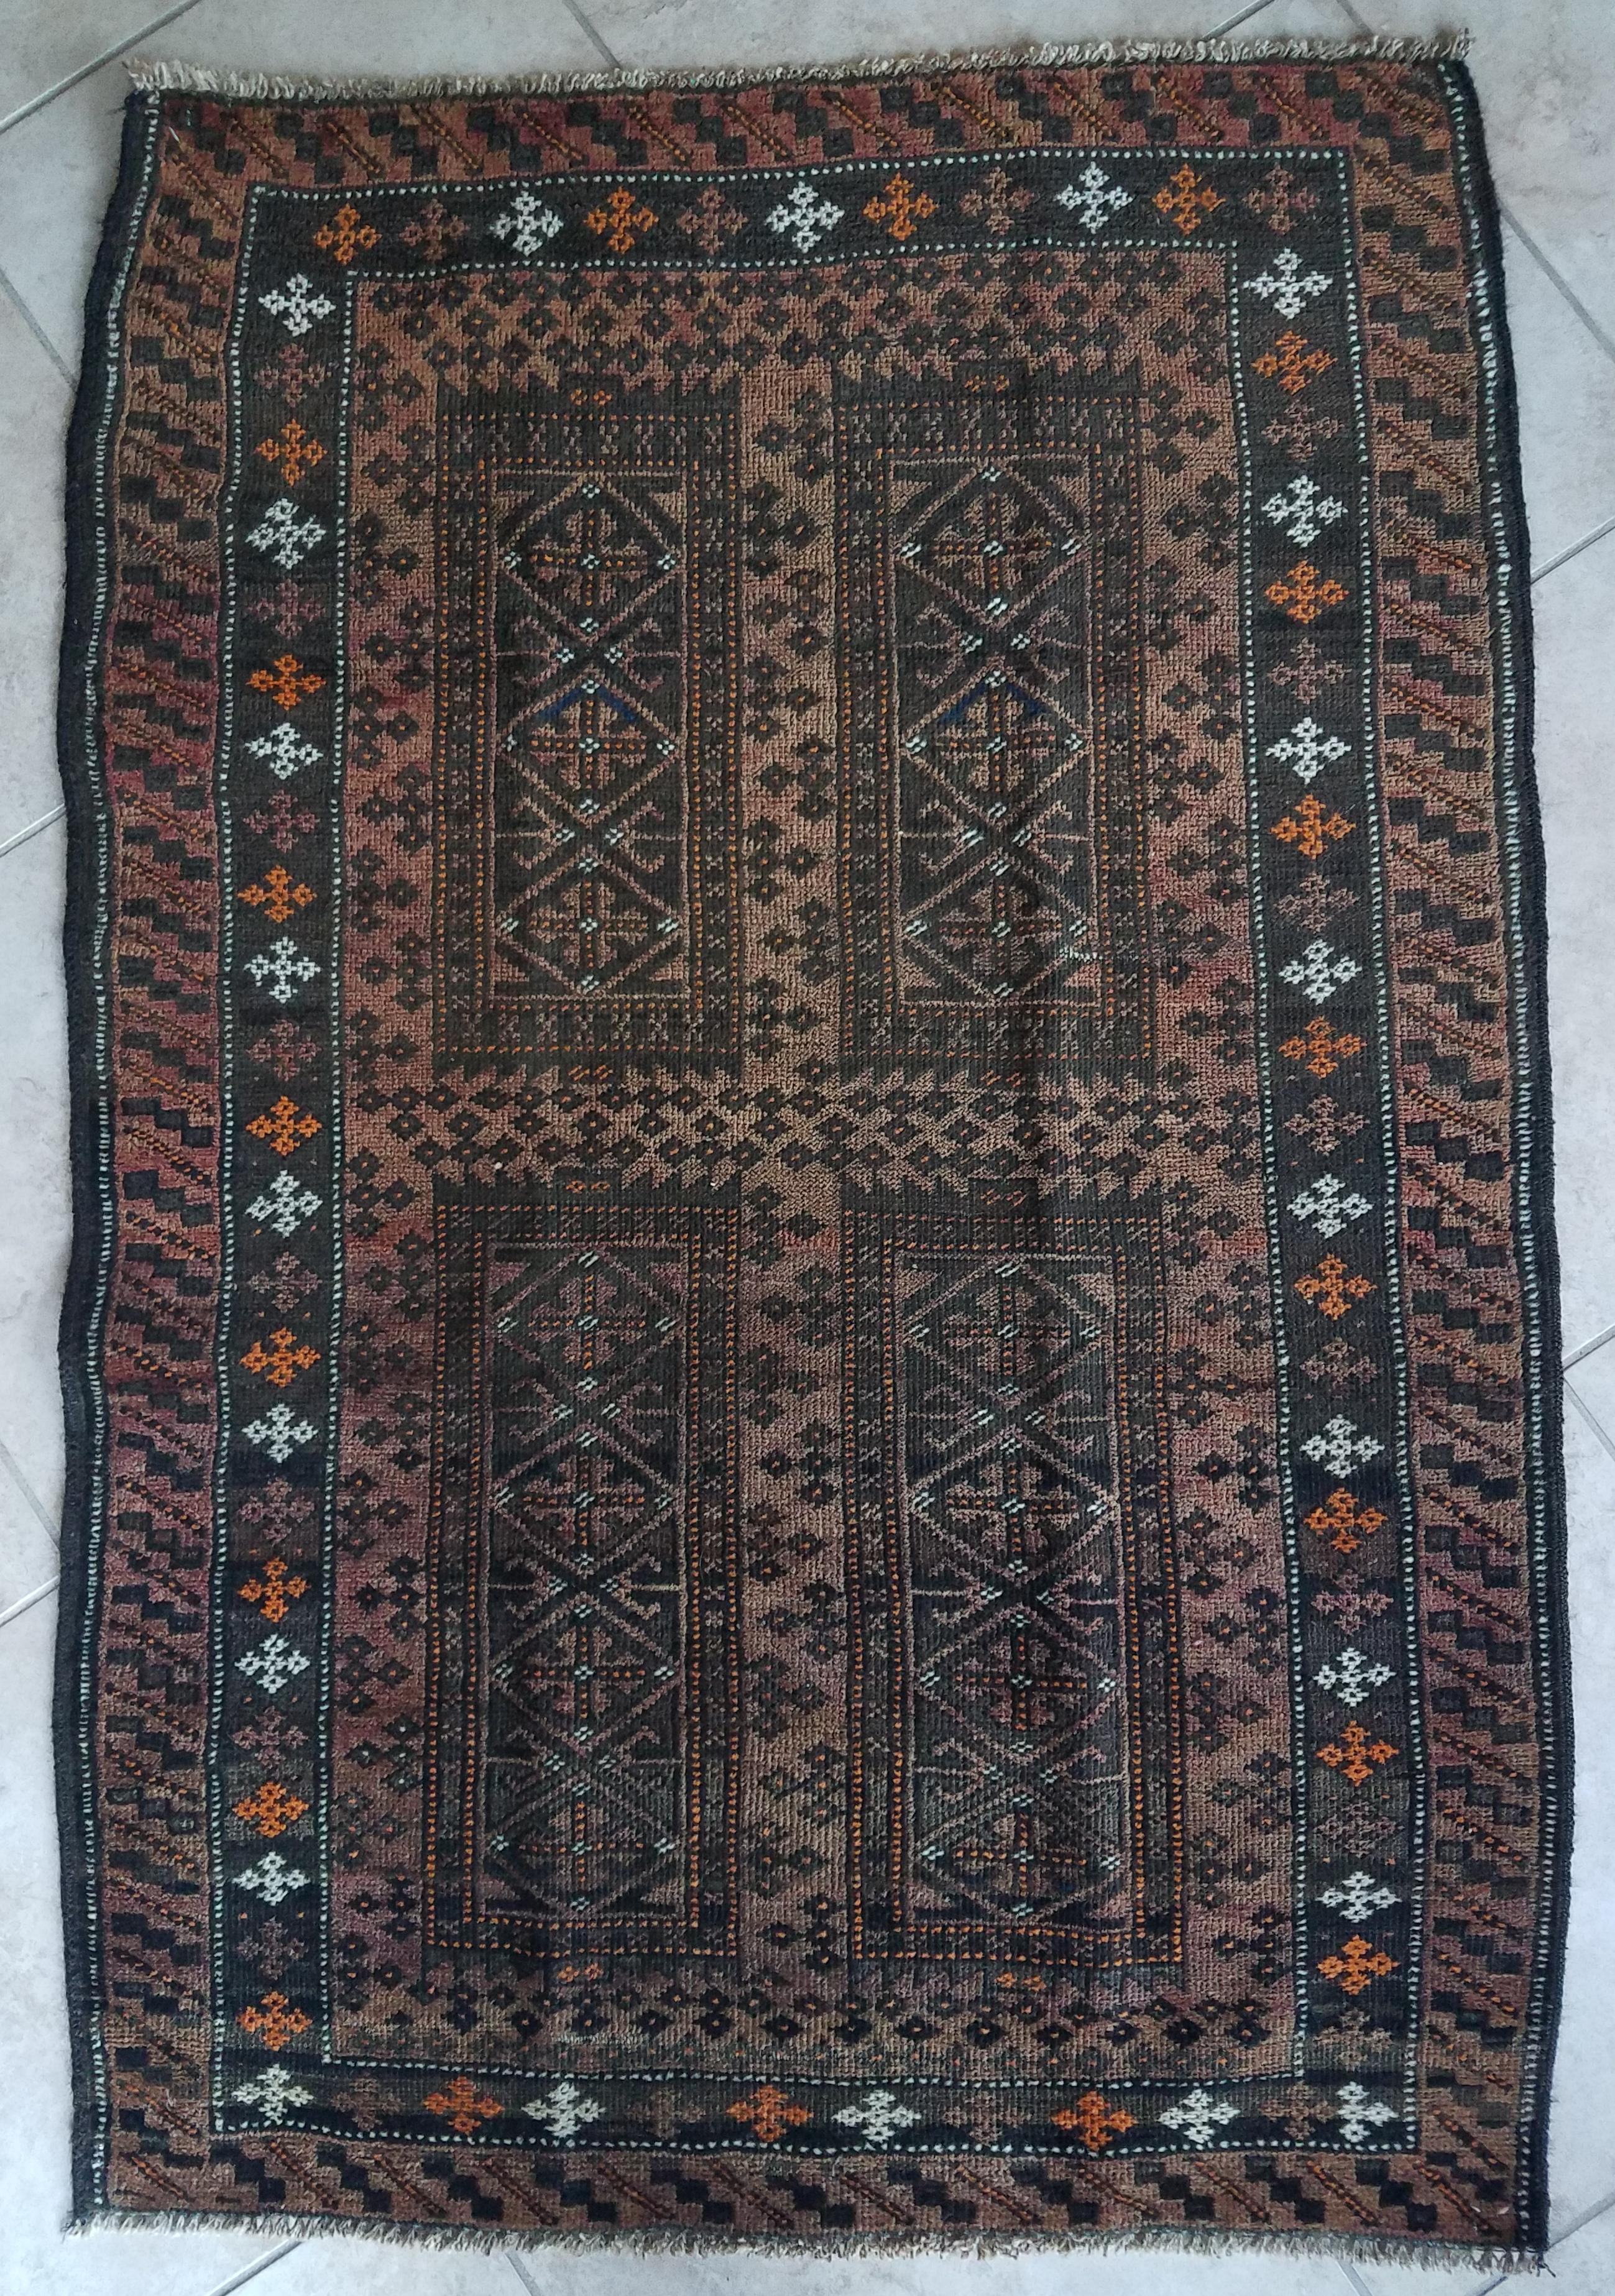 Stunning Oriental area rug measuring approximately 60